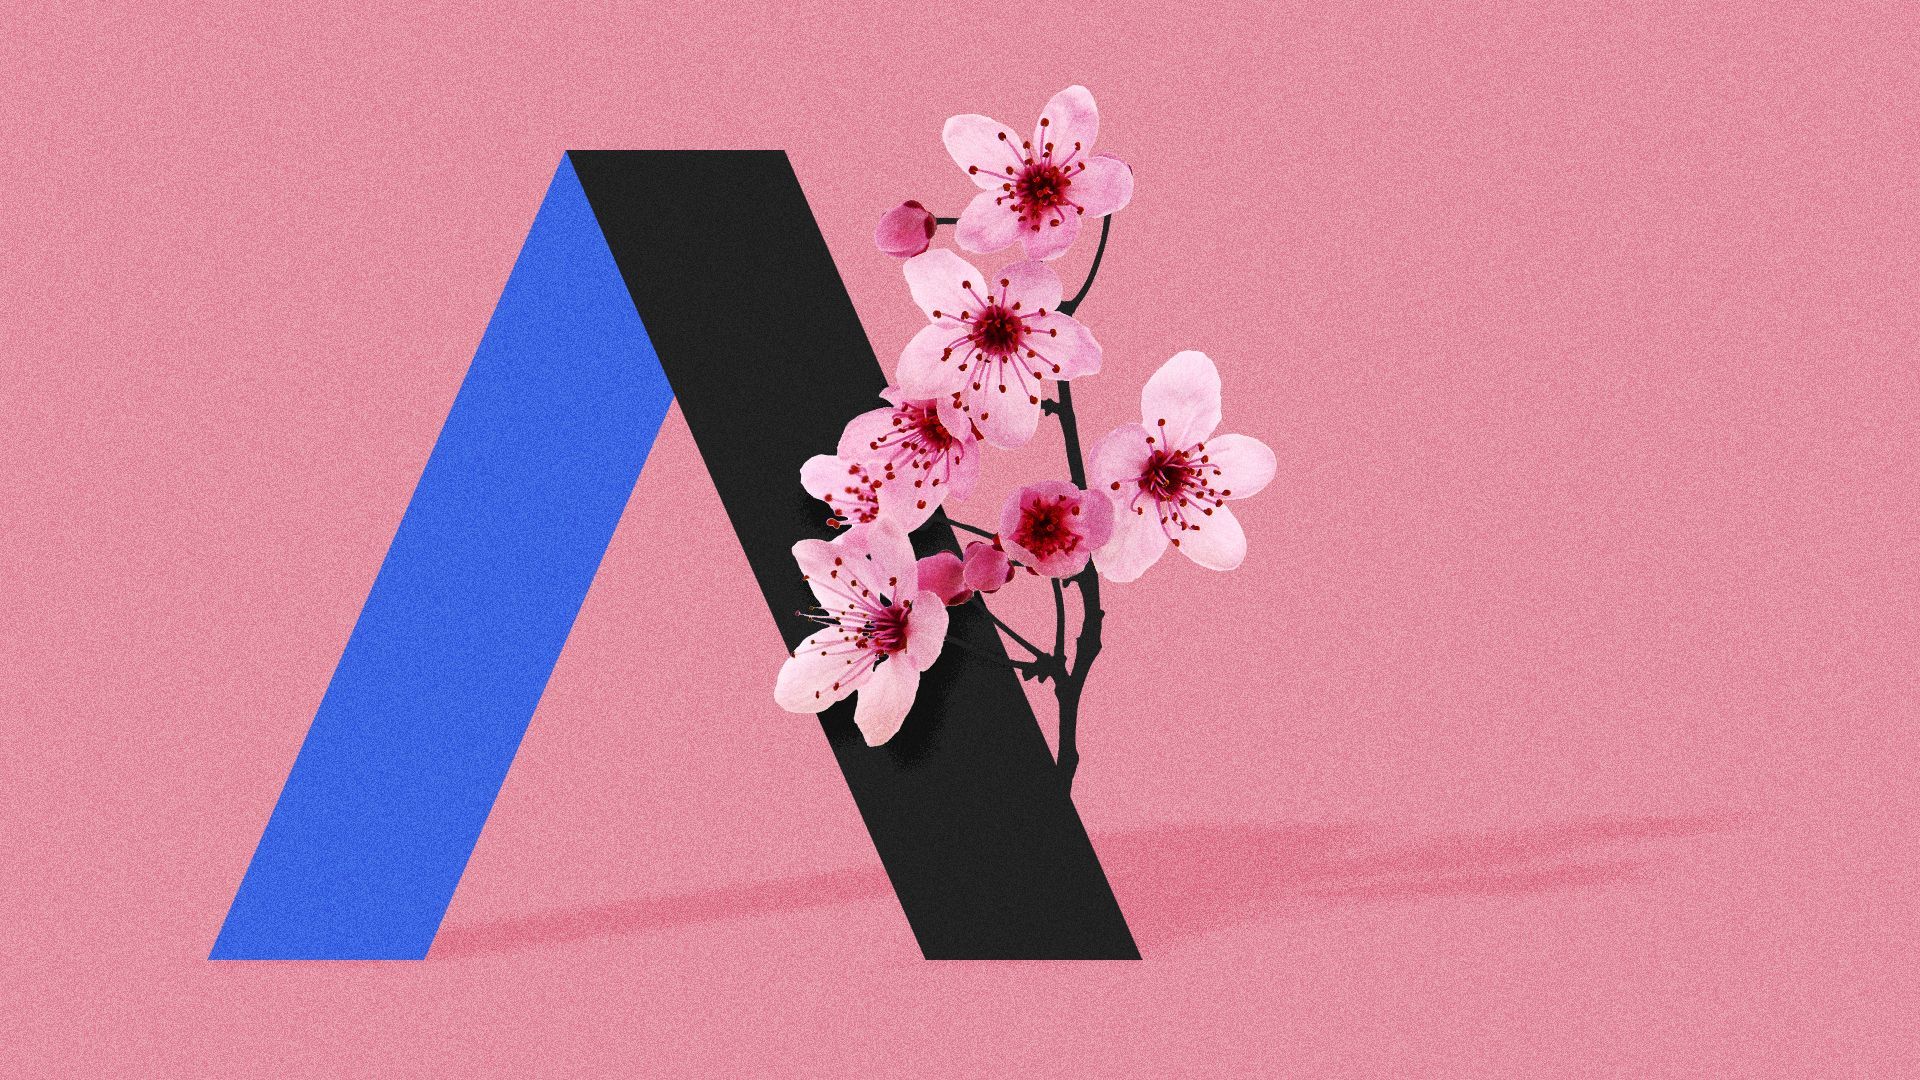 Illustration of the Axios logo growing a cherry blossom branch.